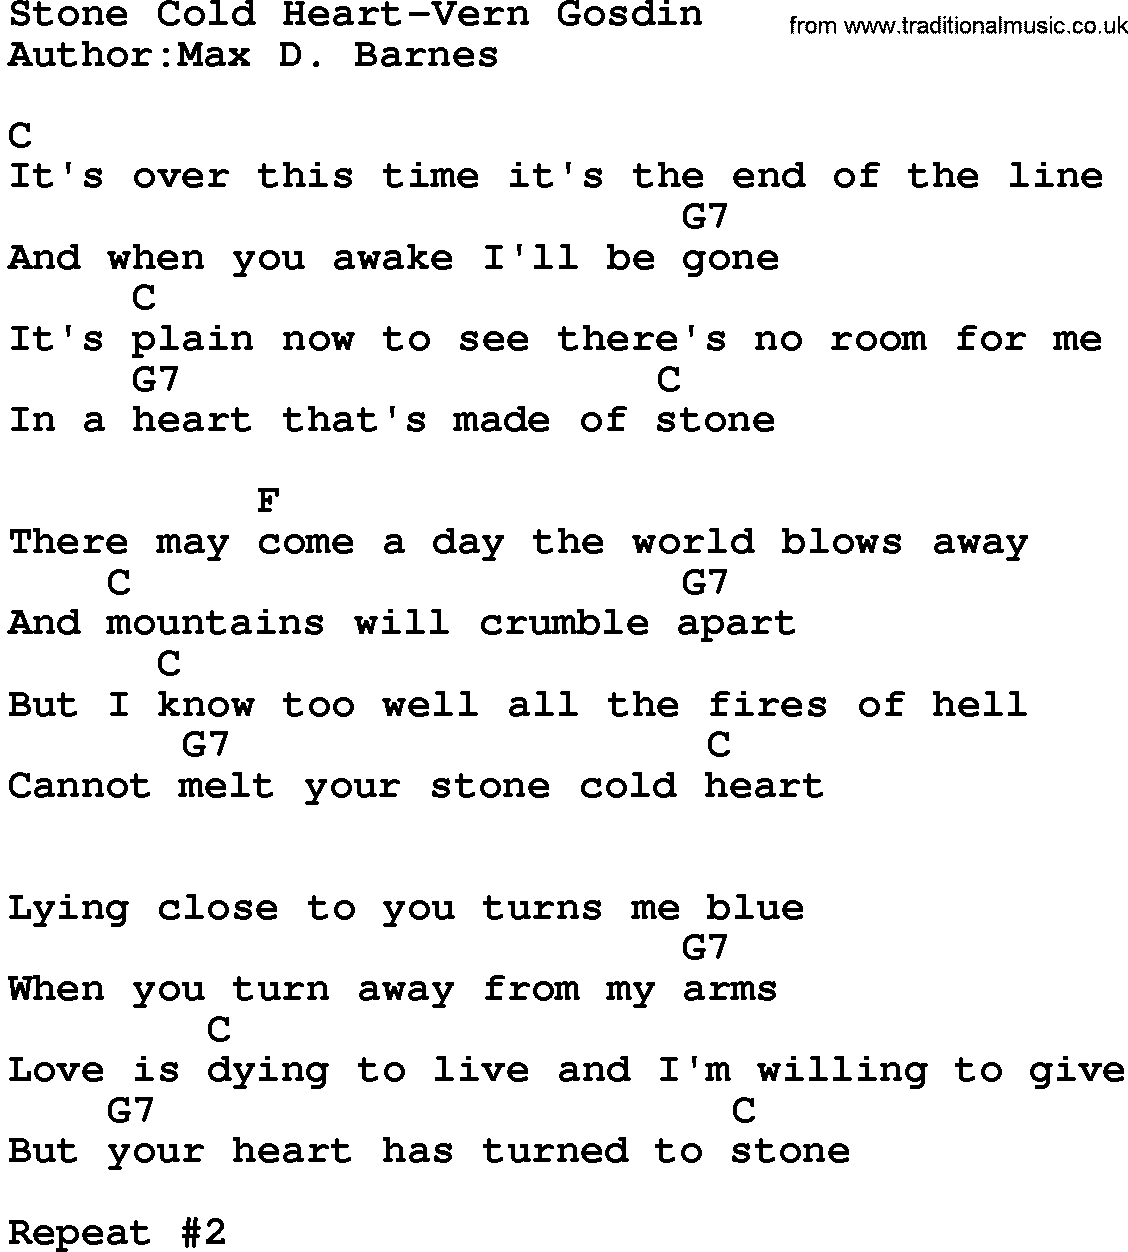 Stone Cold Chords Country Musicstone Cold Heart Vern Gosdin Lyrics And Chords